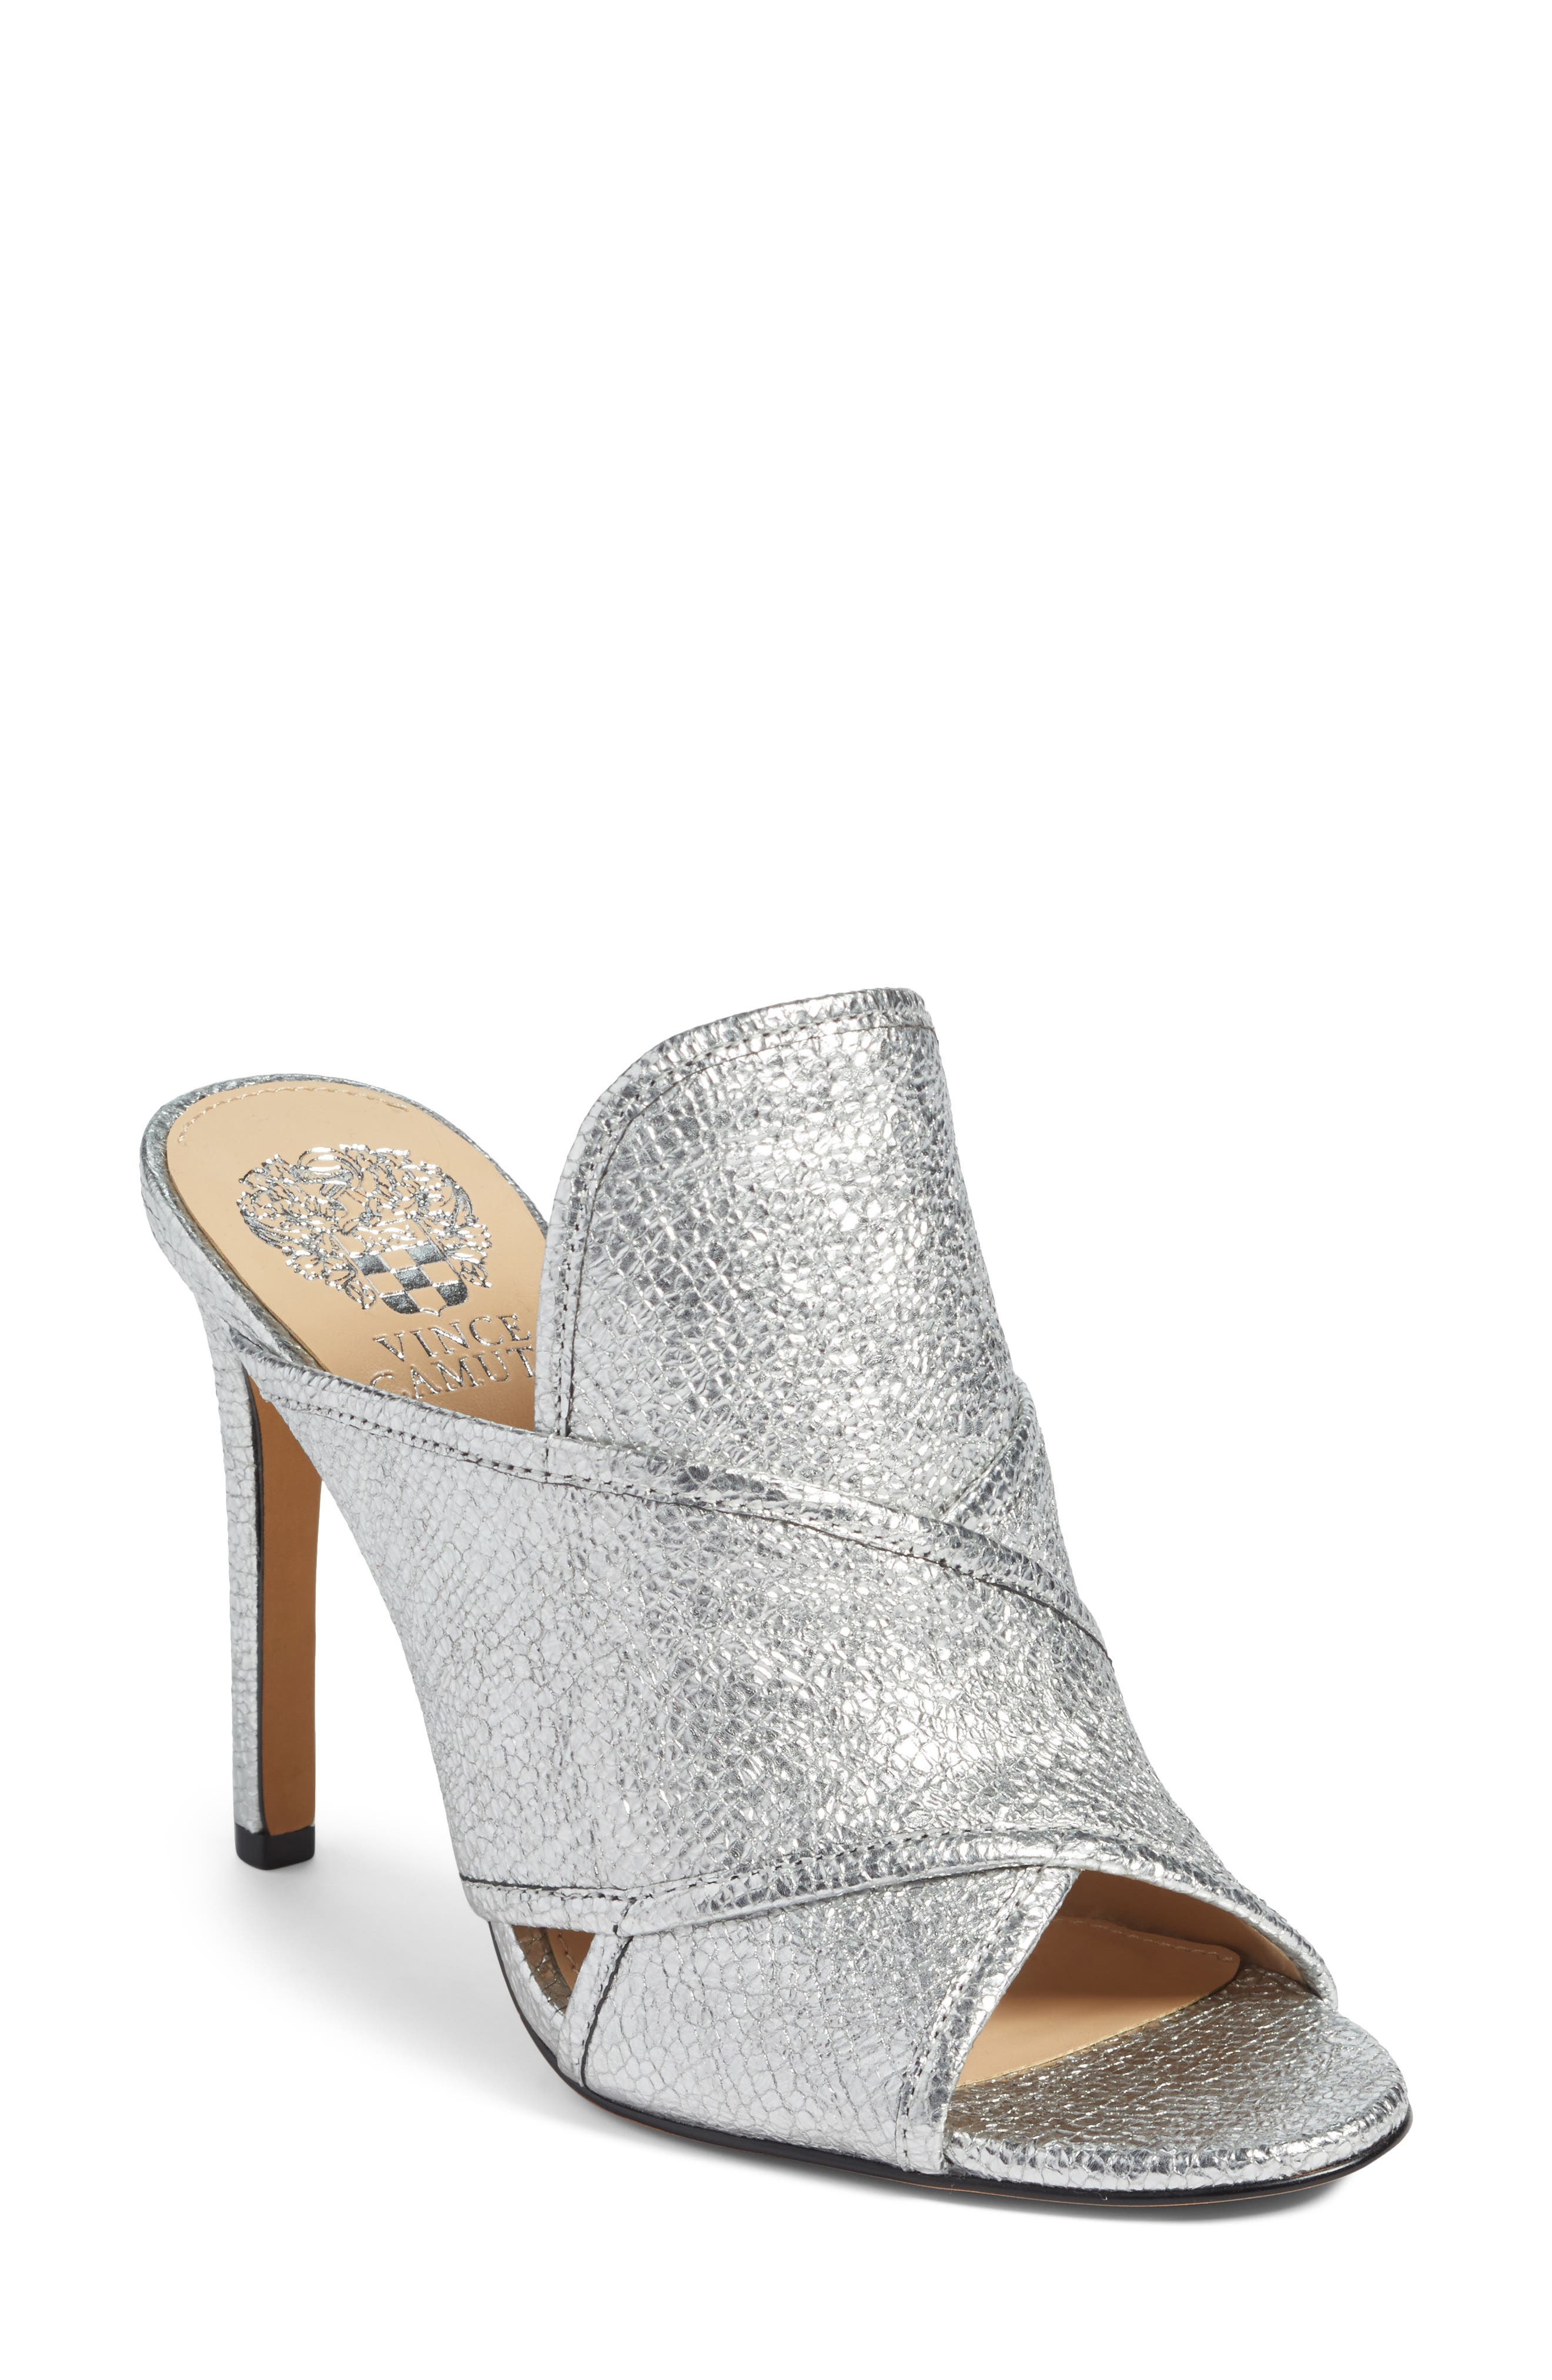 silver mules nordstrom